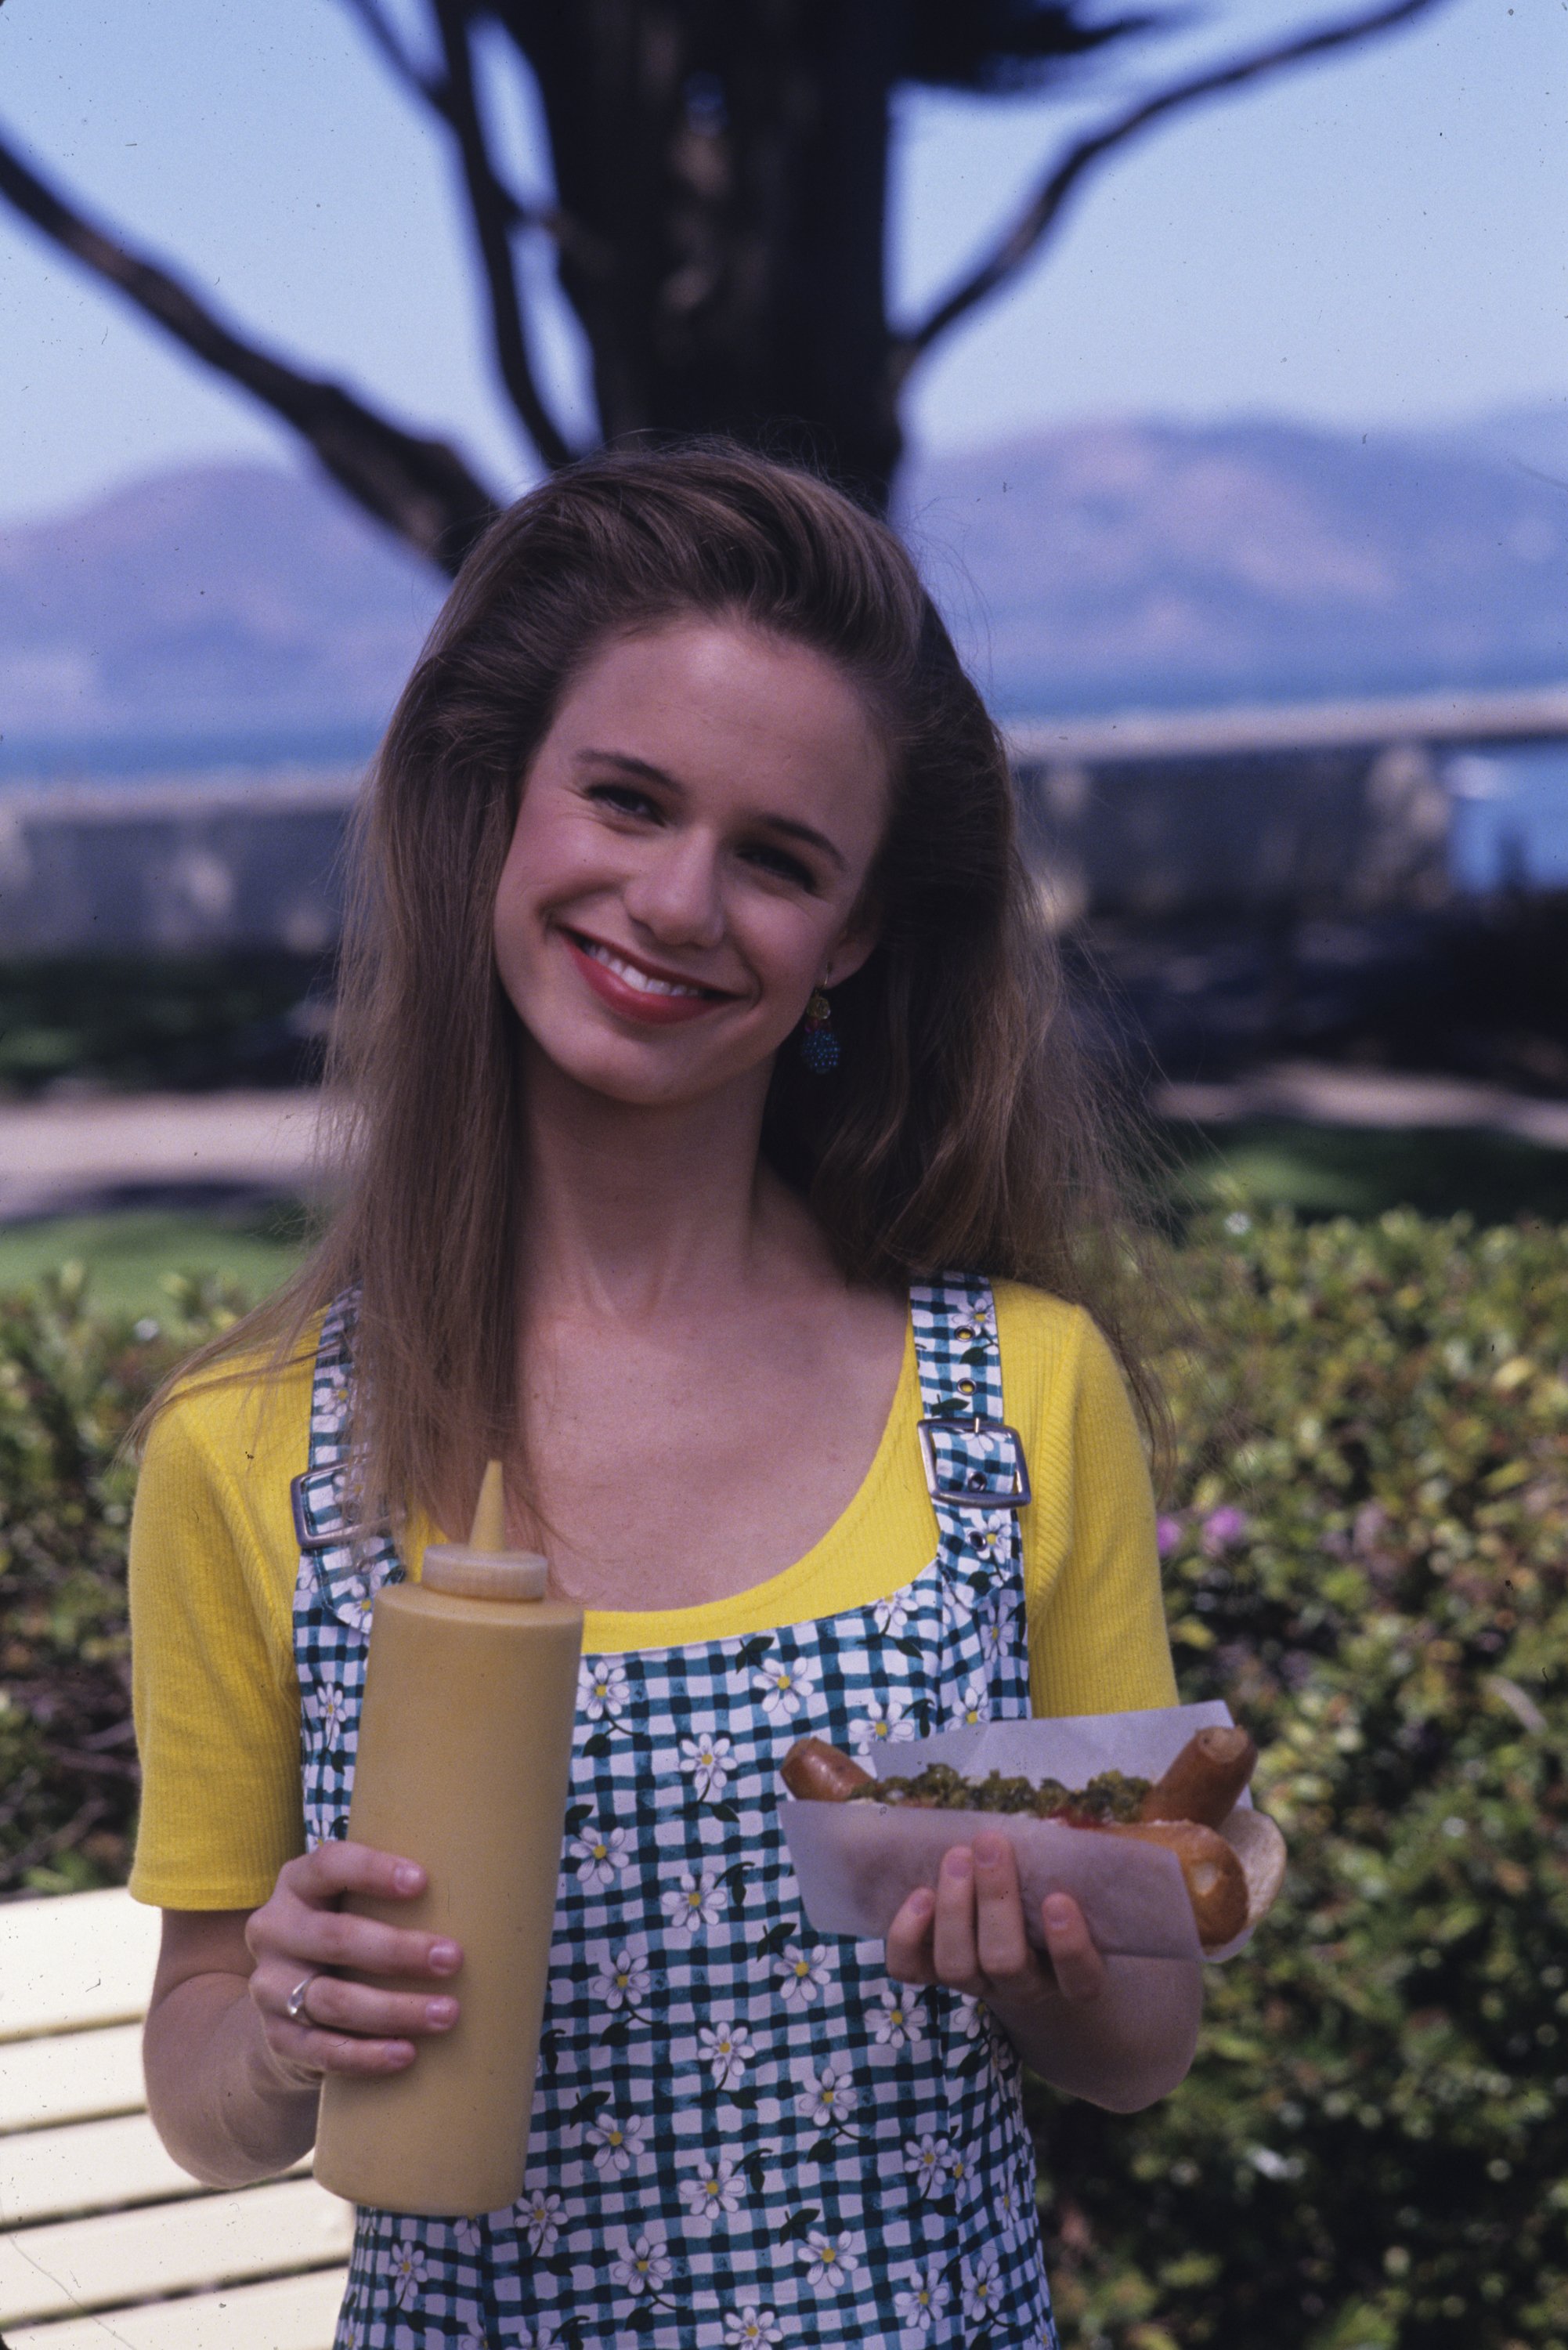 Andrea Barber as Kimmy Barber on location in San Francisco for "Full House" on September 27, 1994. | Source: Getty Images